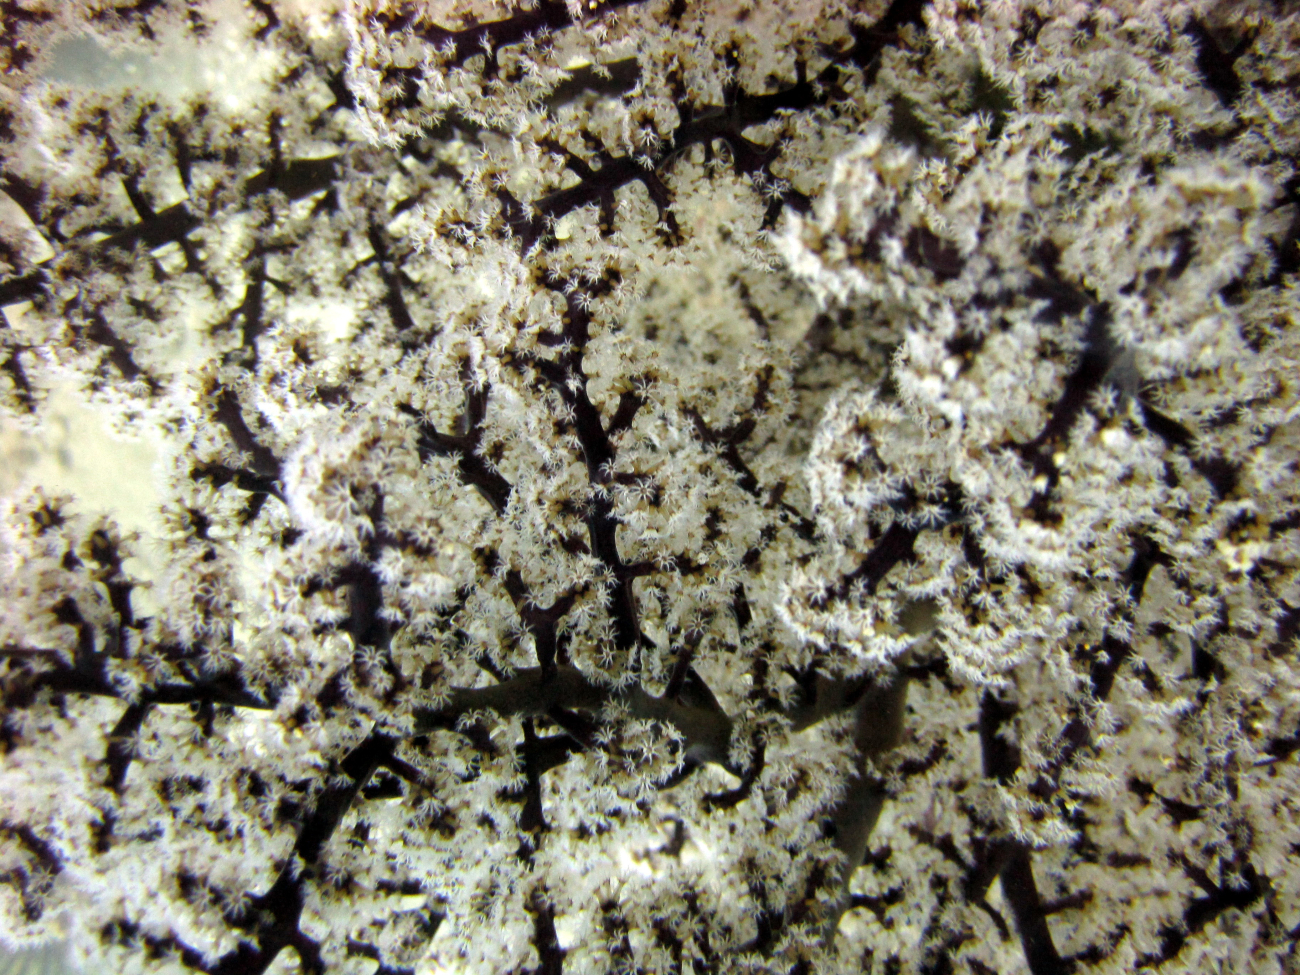 Branches of a gorgonian coral with white polyps